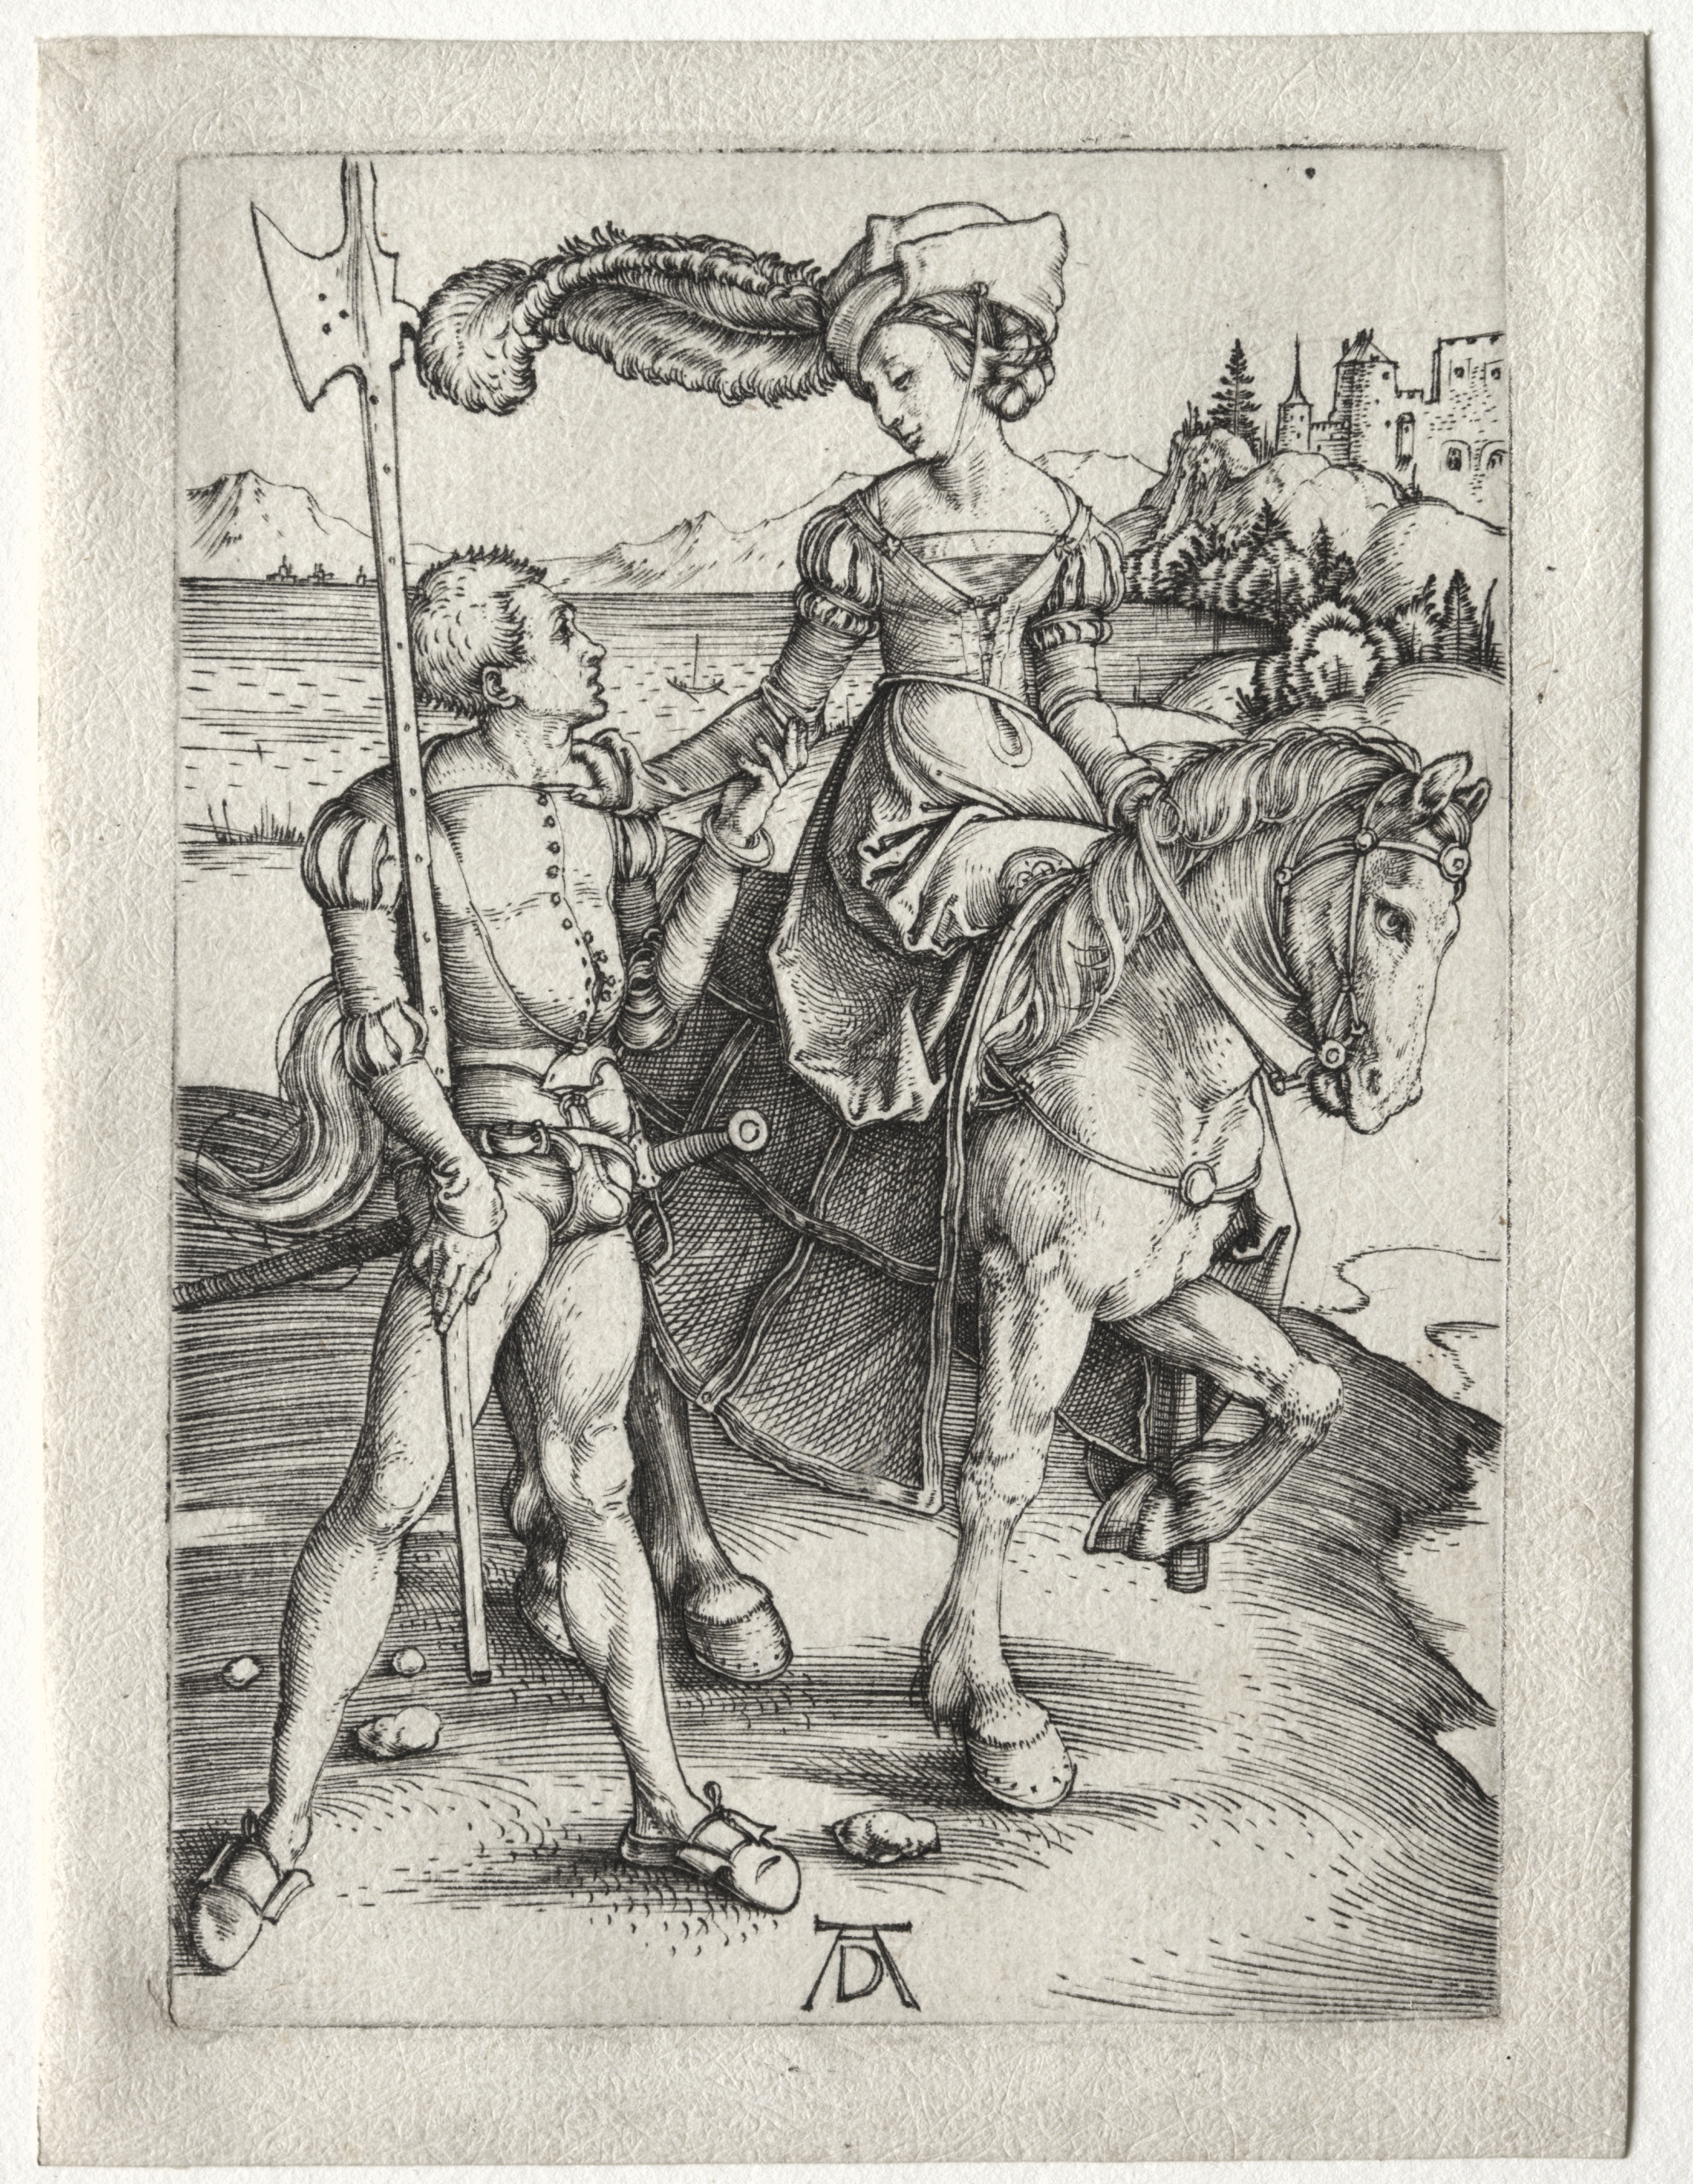 The Lady Riding and the Landsknecht